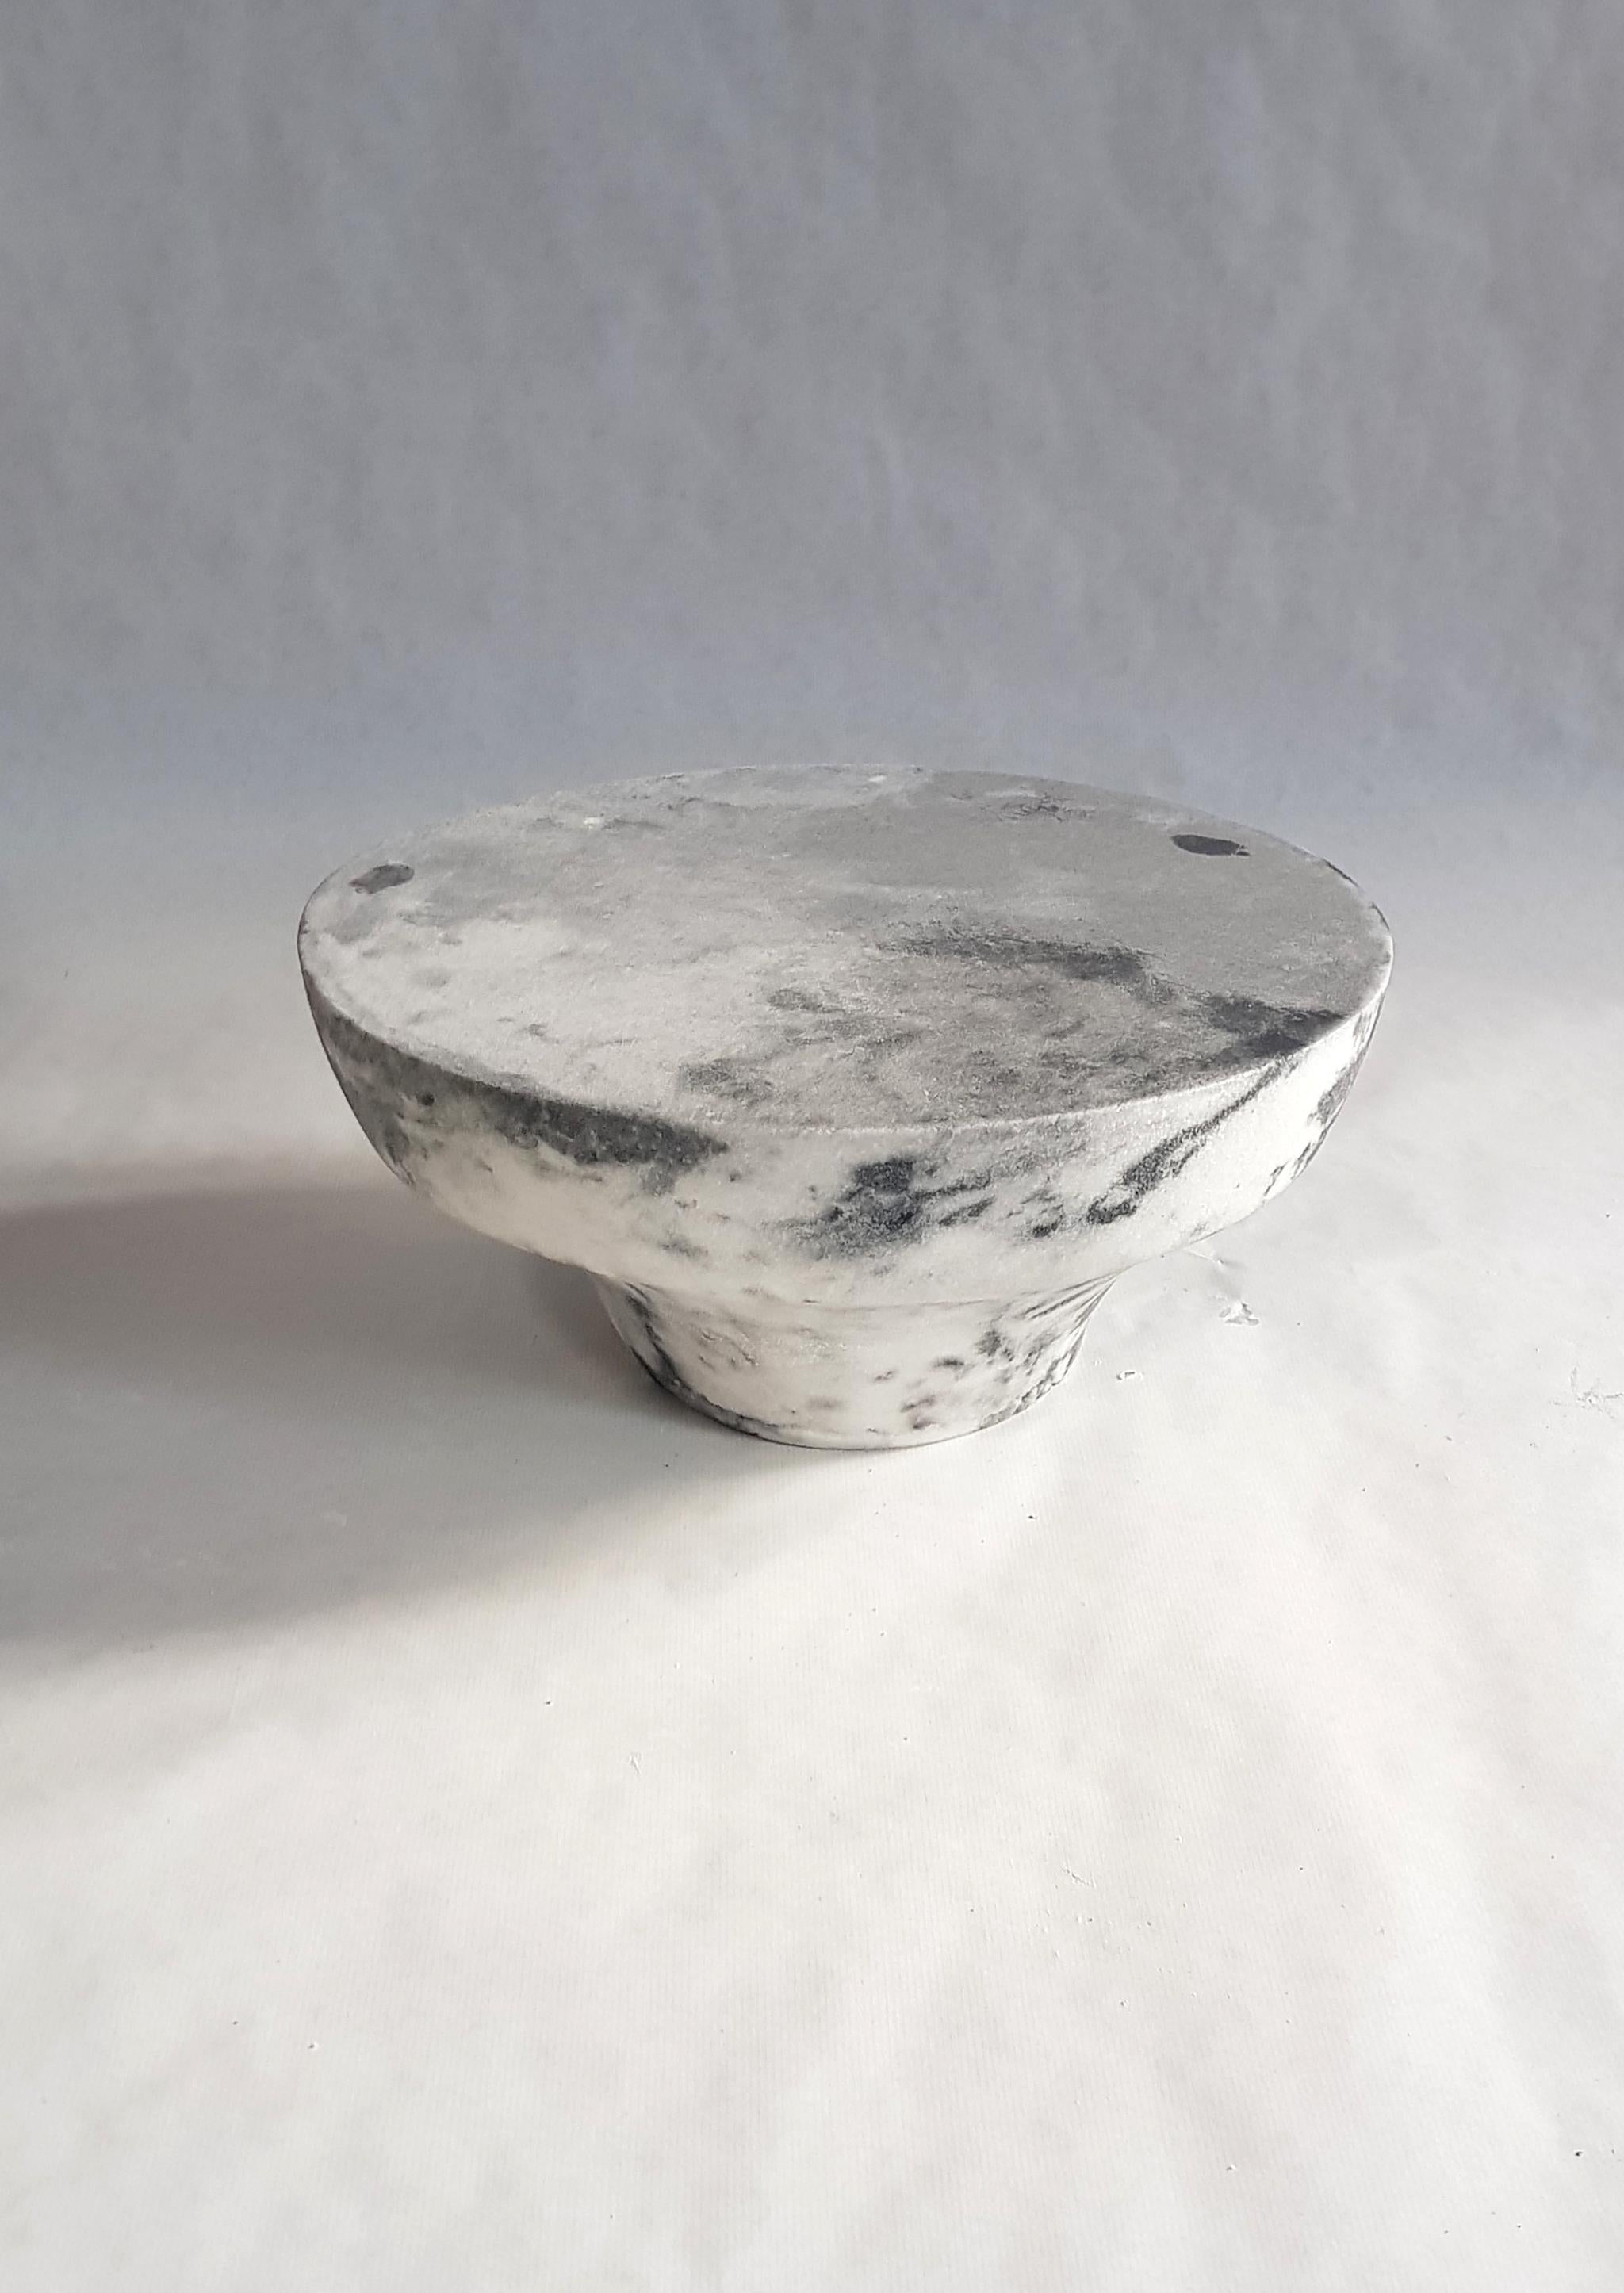 Marble Salt Meditation Stool by Roxane Lahidji
Material: Marbled Salts
A unique award winning technique developed by Roxane Lahidji
Dimensions: 40 x 40 x 20 cm
Unique

Award winner of Bolia Design Awards 2019 and FD100 and present in the collections